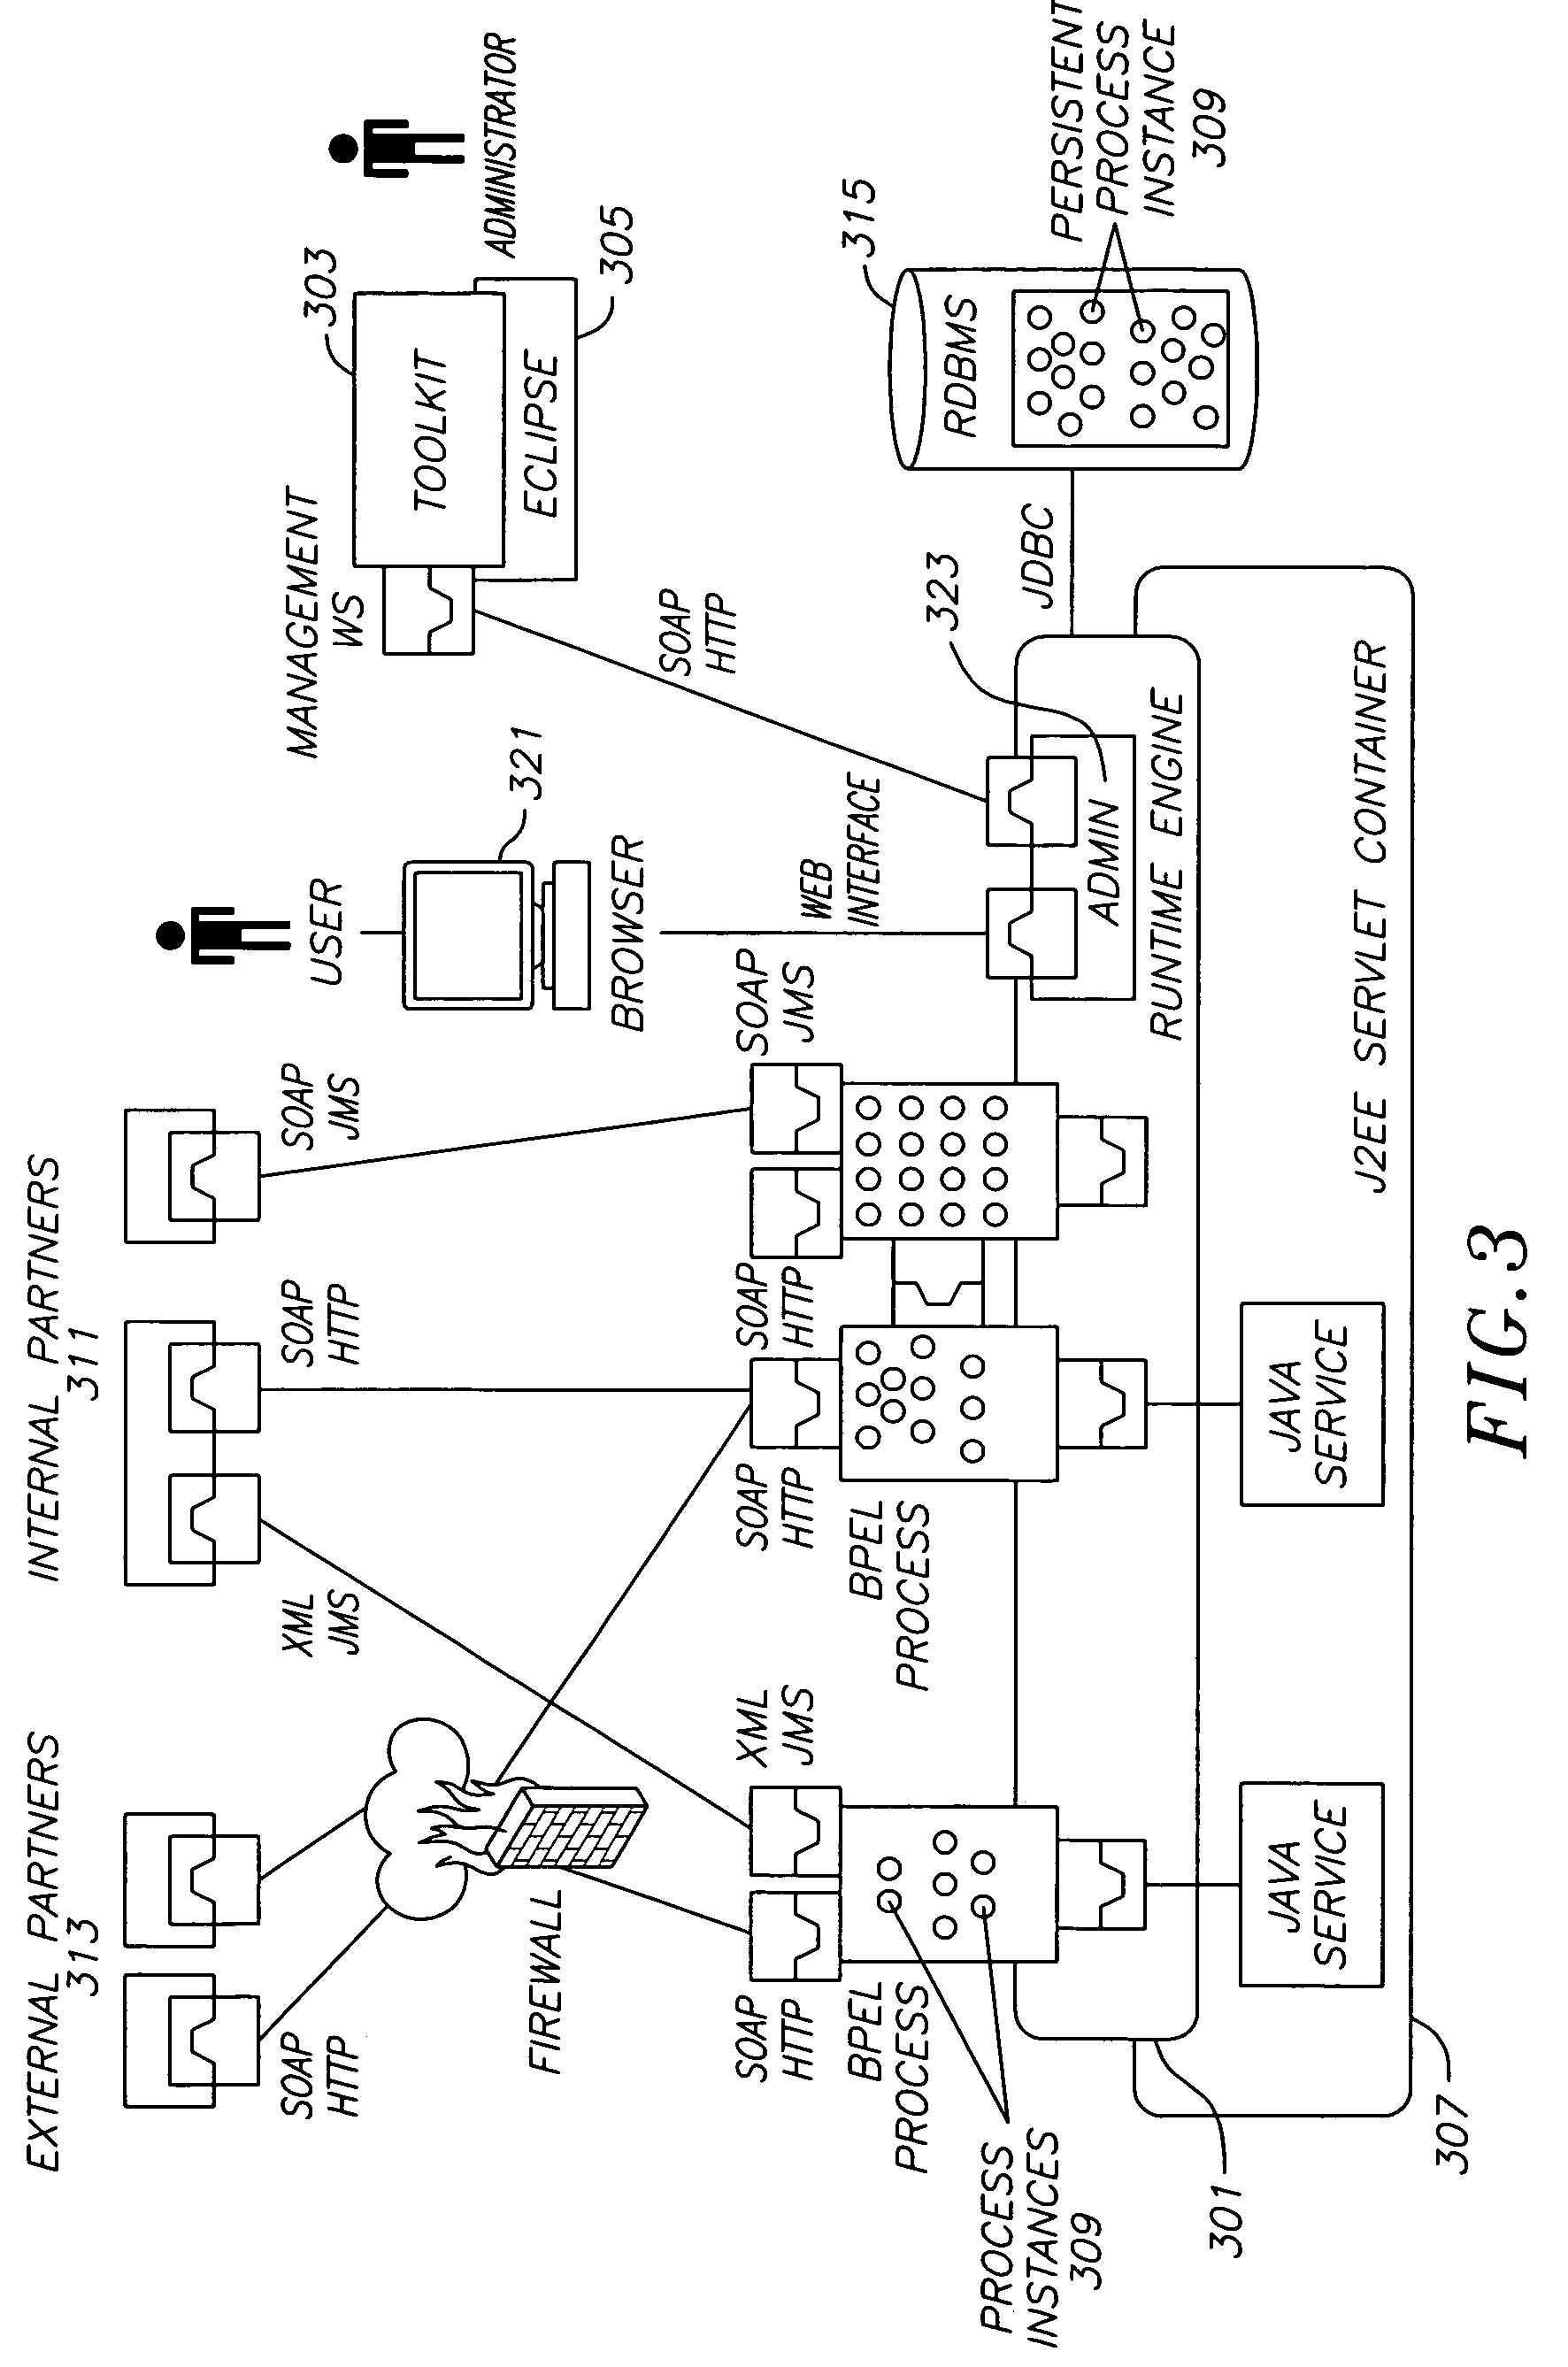 System and method for predictive process management